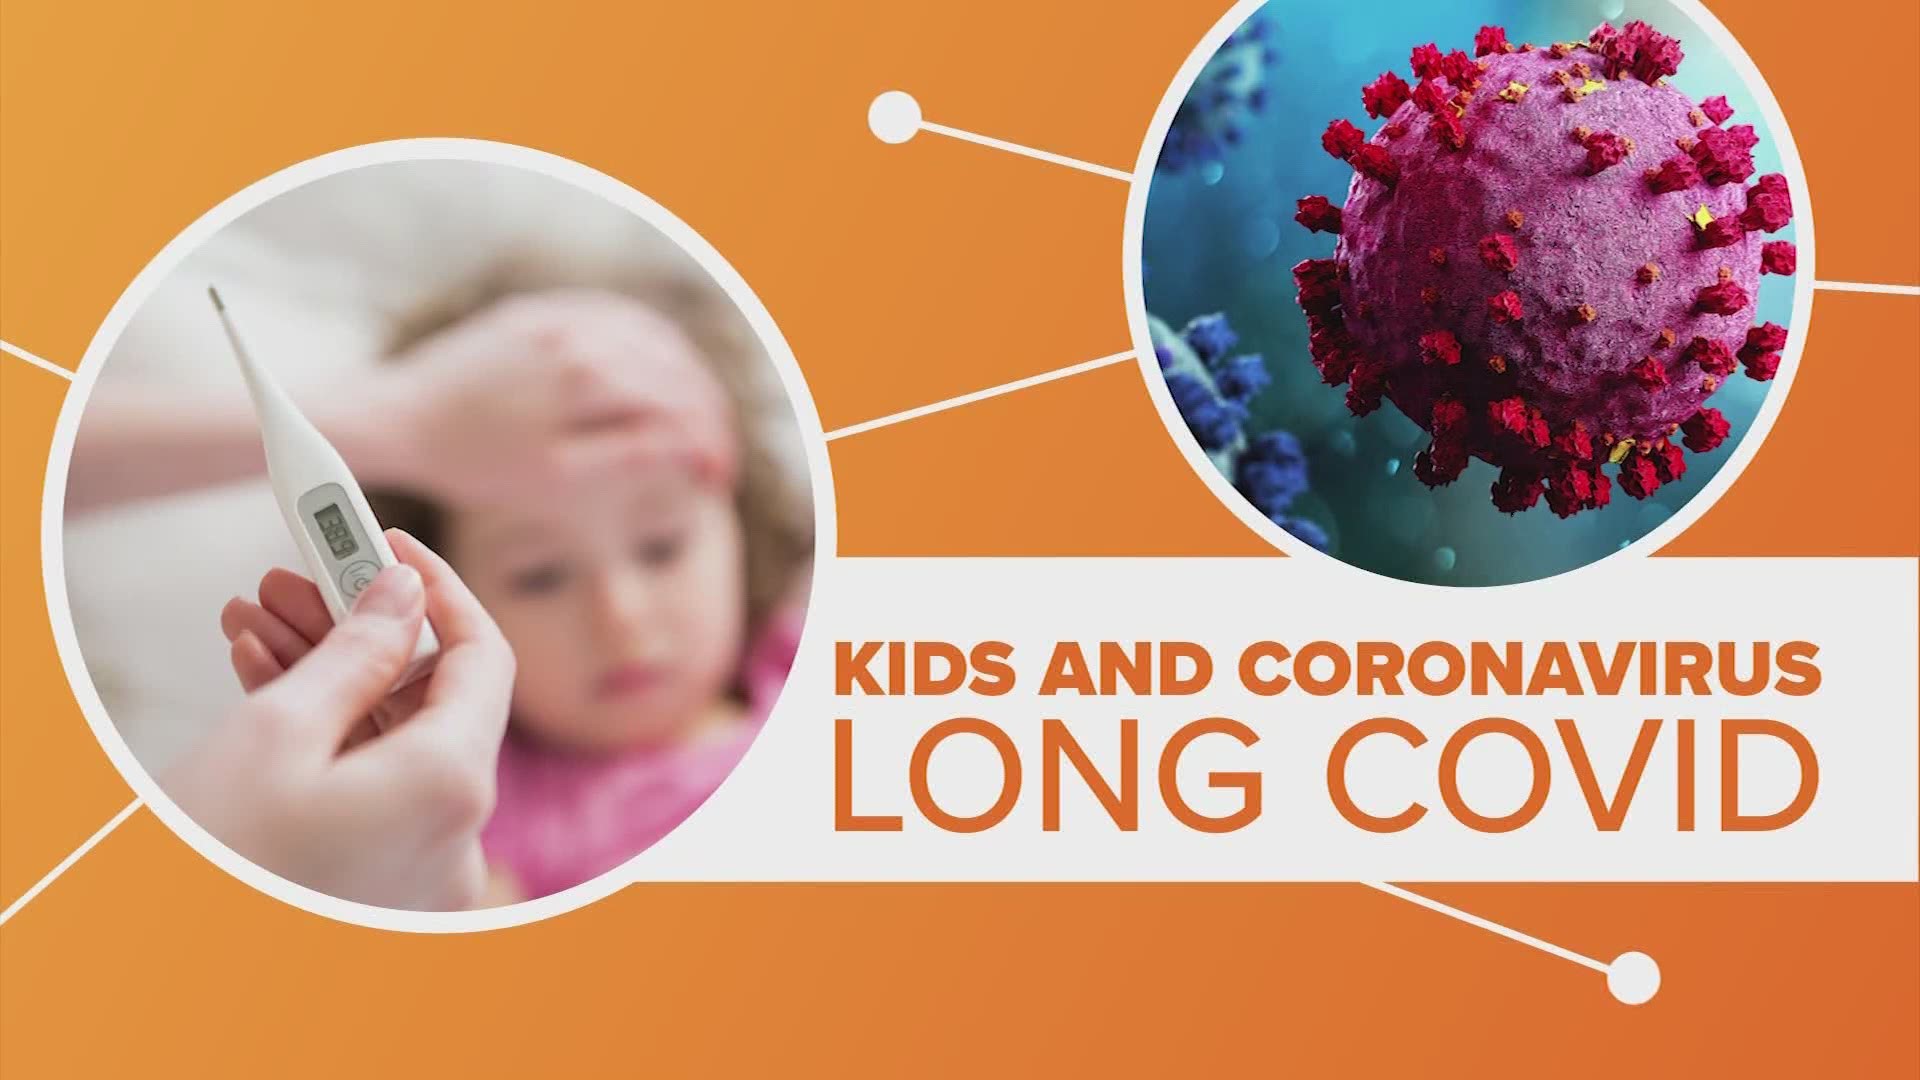 Growing evidence is showing that although kids' COVID symptoms aren't severe, they are lasting longer and that could be a problem. Connect the Dots.